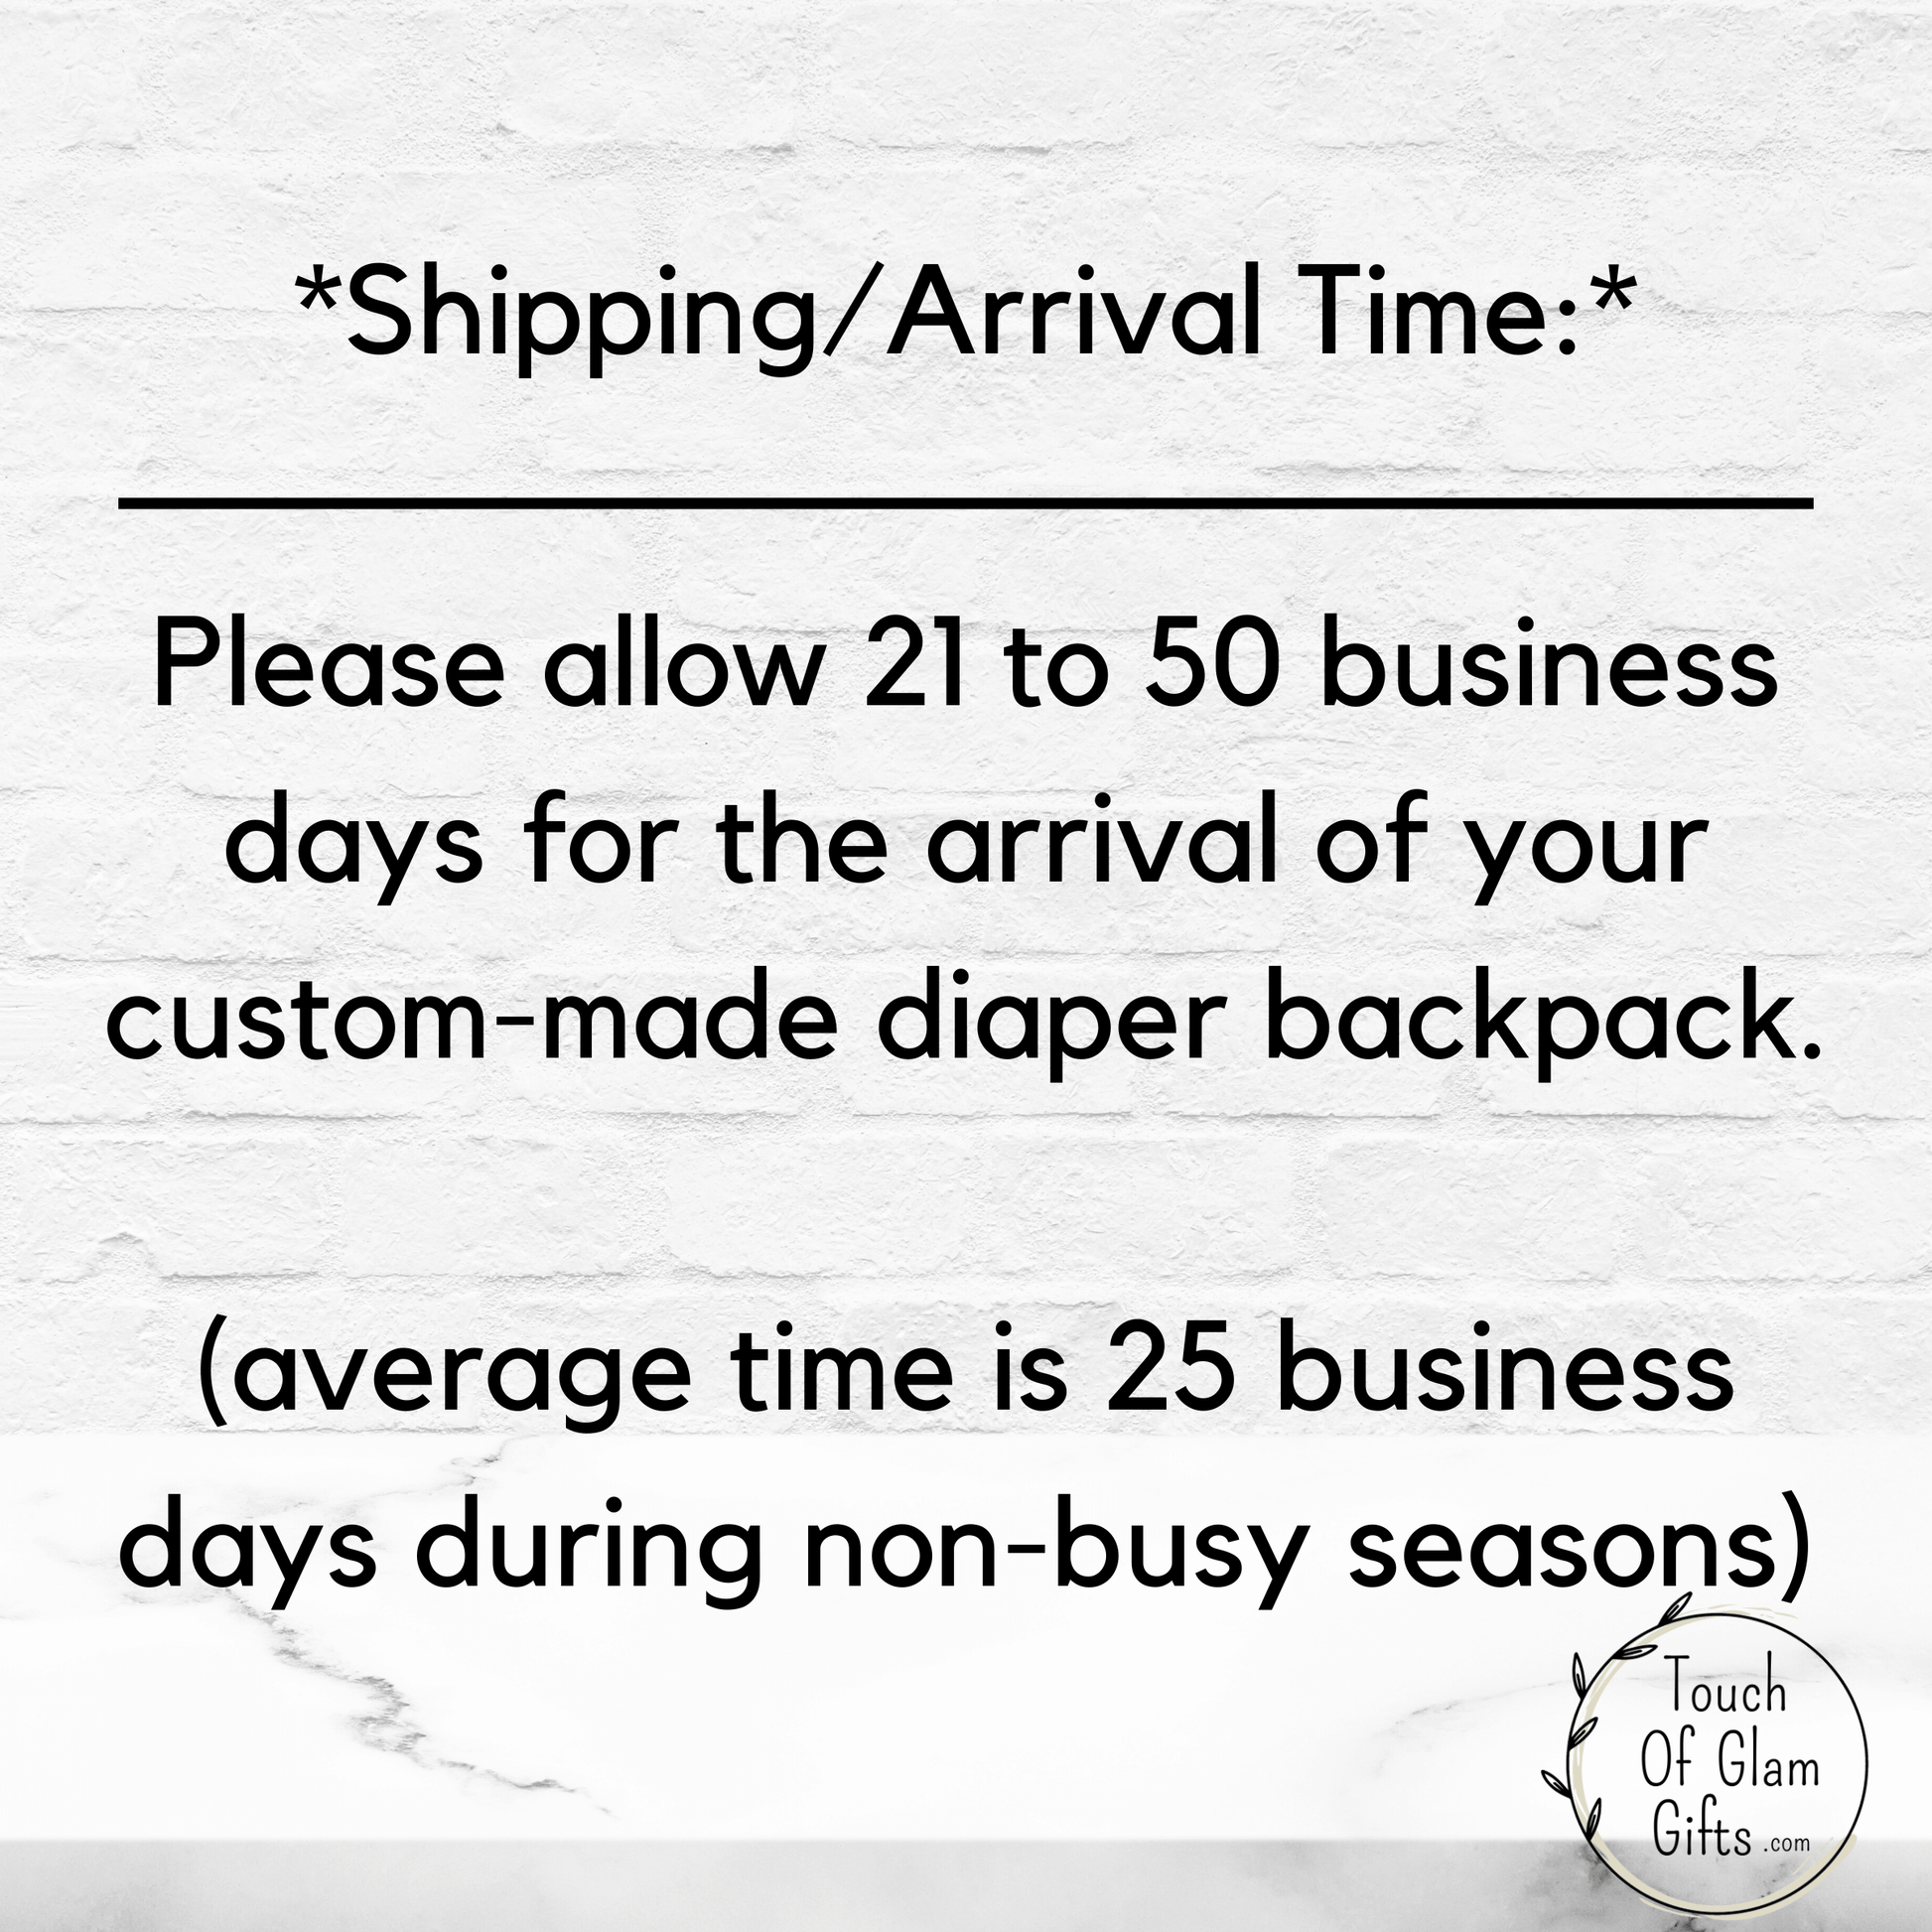 Shipping and arrival time for your one of a kind dad life backpack. Average arrival time is twenty five business days, but please allow up to fifty days for the arrival.